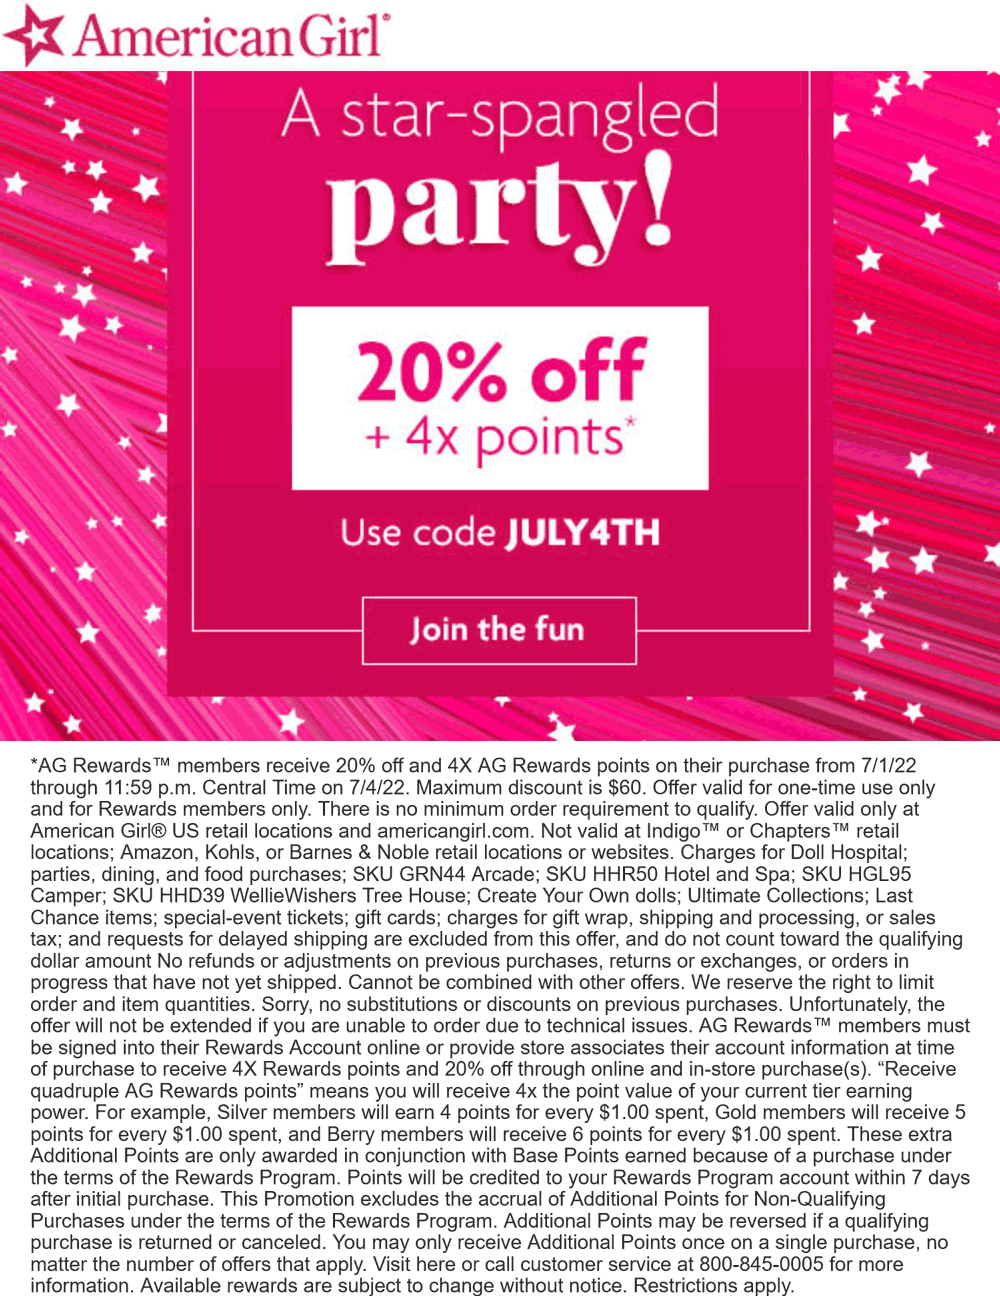 American Girl stores Coupon  20% off at American Girl doll stores, or online via promo code JULY4TH #americangirl 